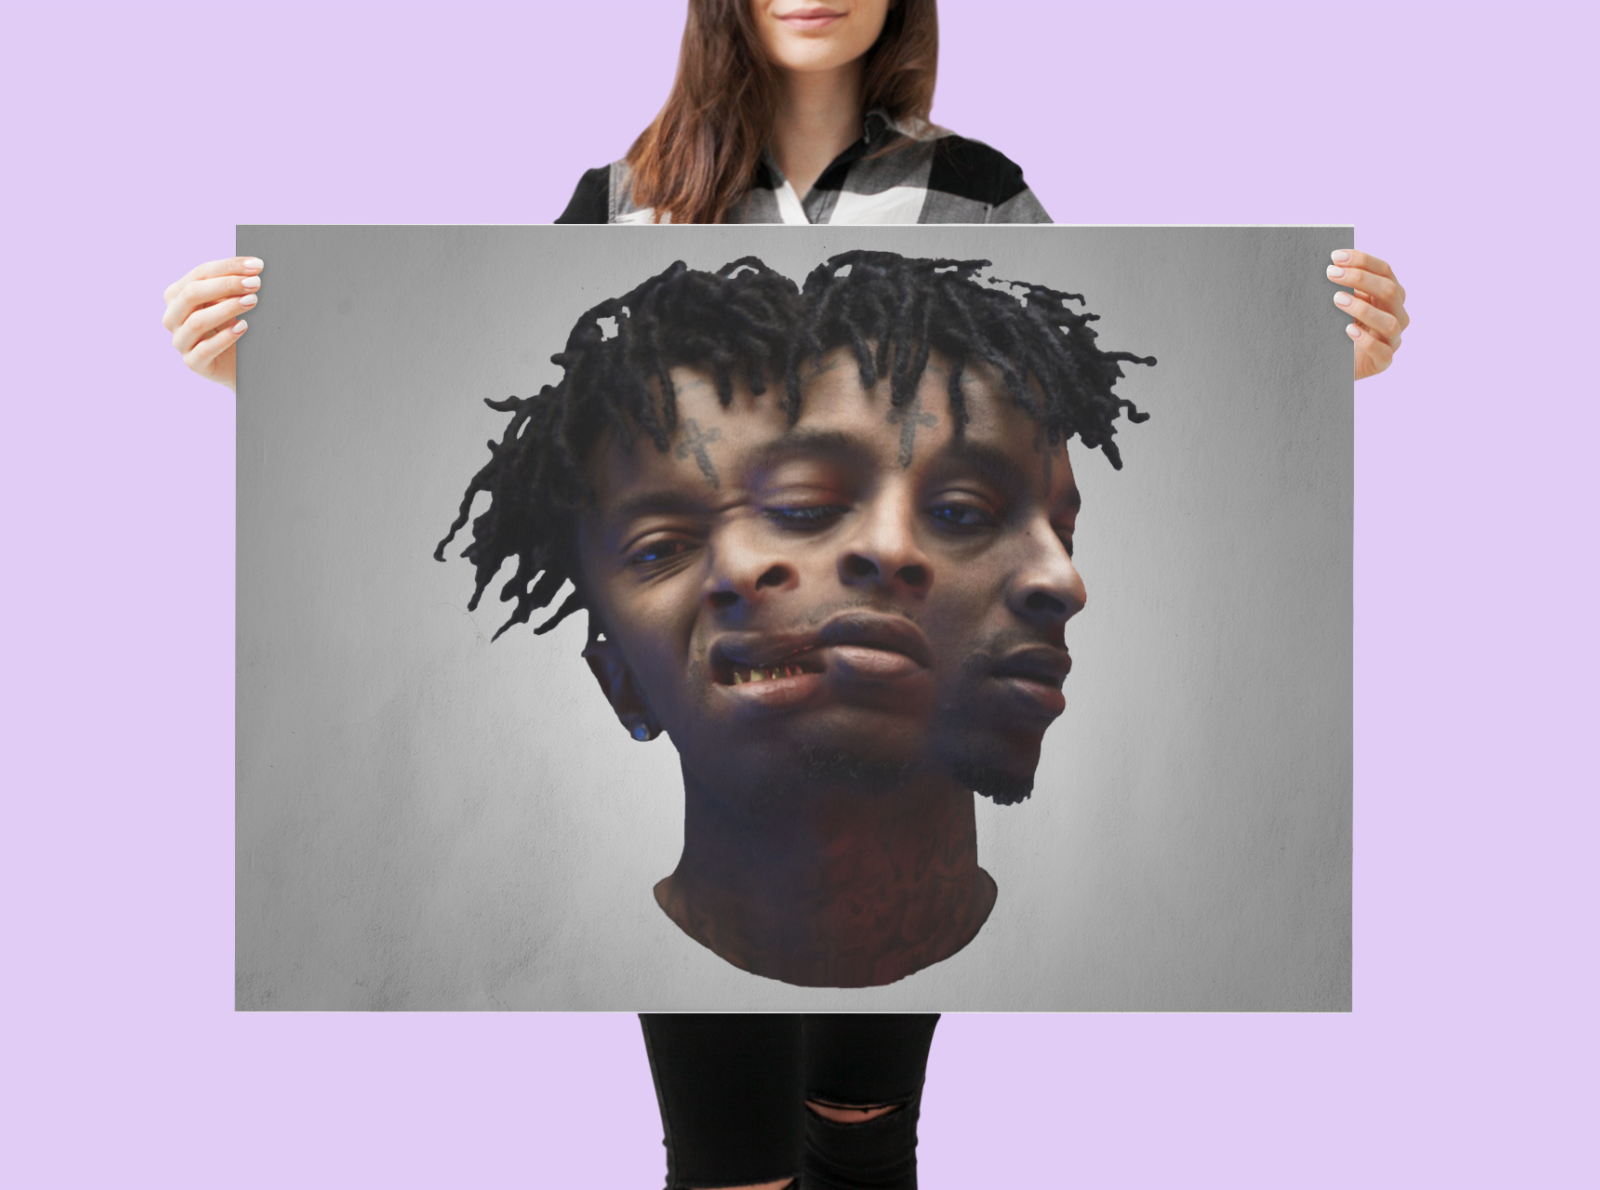 21 Savage T Shirt Poster By Axel Deron On Dribbble